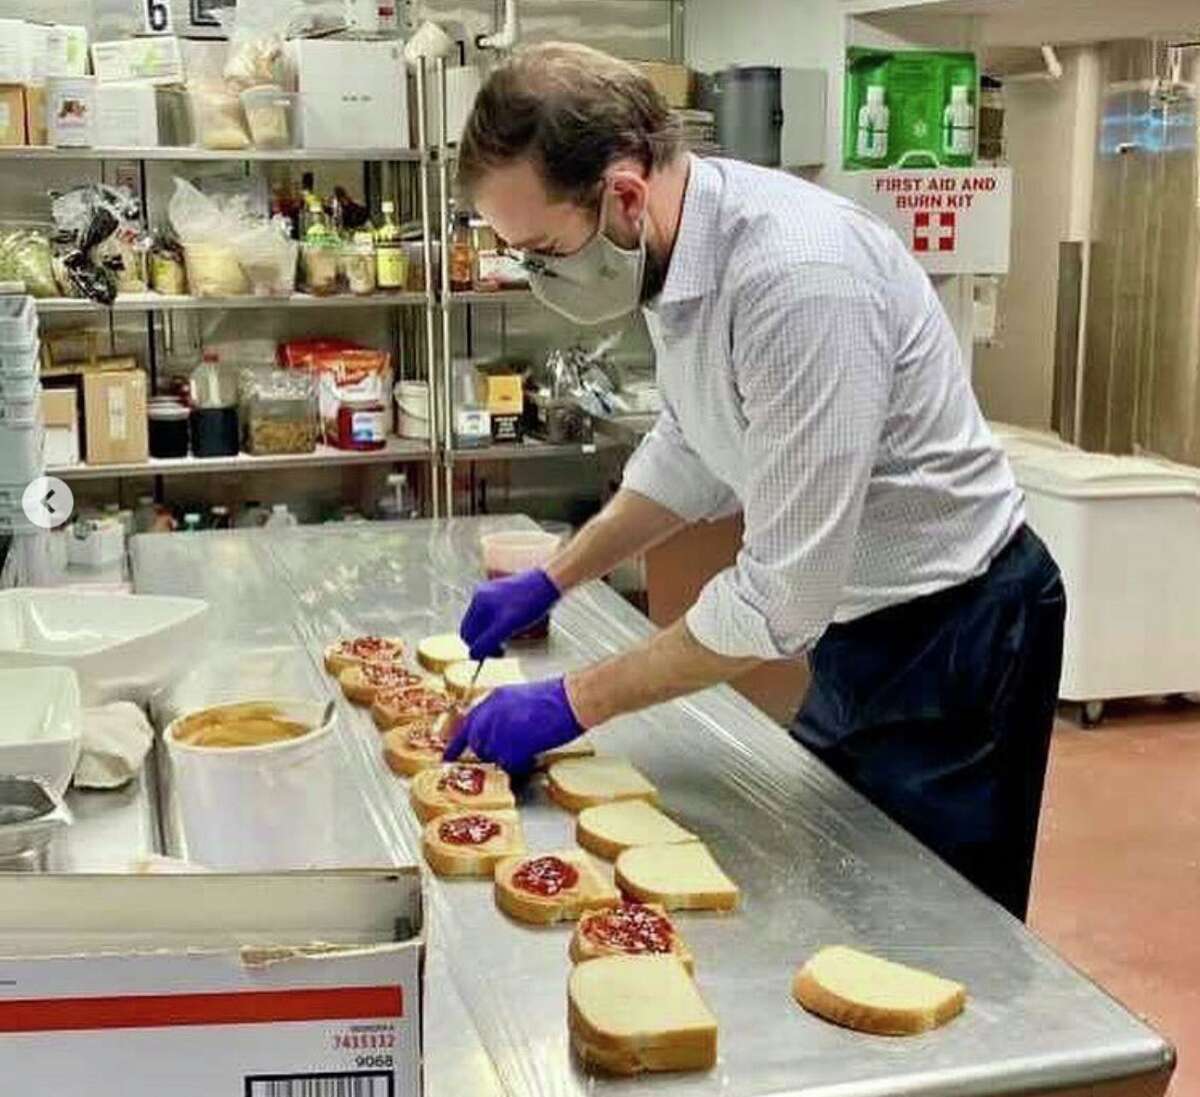 Michael McClellan, director of food and beverage at the St. Anthony, makes PB&J sandwiches for hotel employees during the recent snow storm.